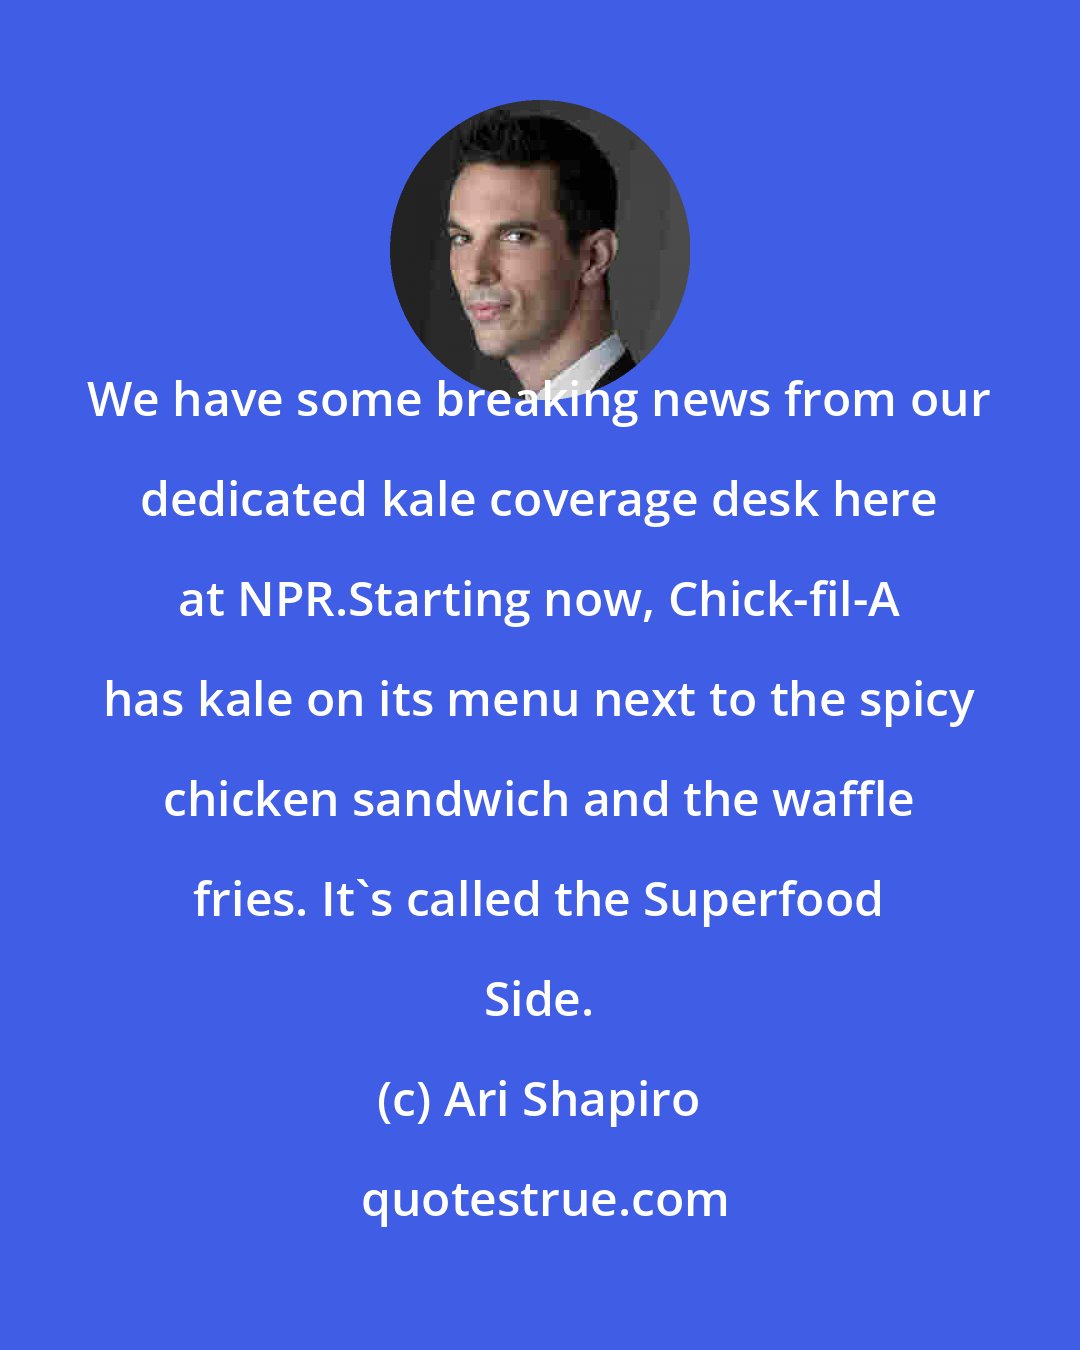 Ari Shapiro: We have some breaking news from our dedicated kale coverage desk here at NPR.Starting now, Chick-fil-A has kale on its menu next to the spicy chicken sandwich and the waffle fries. It's called the Superfood Side.